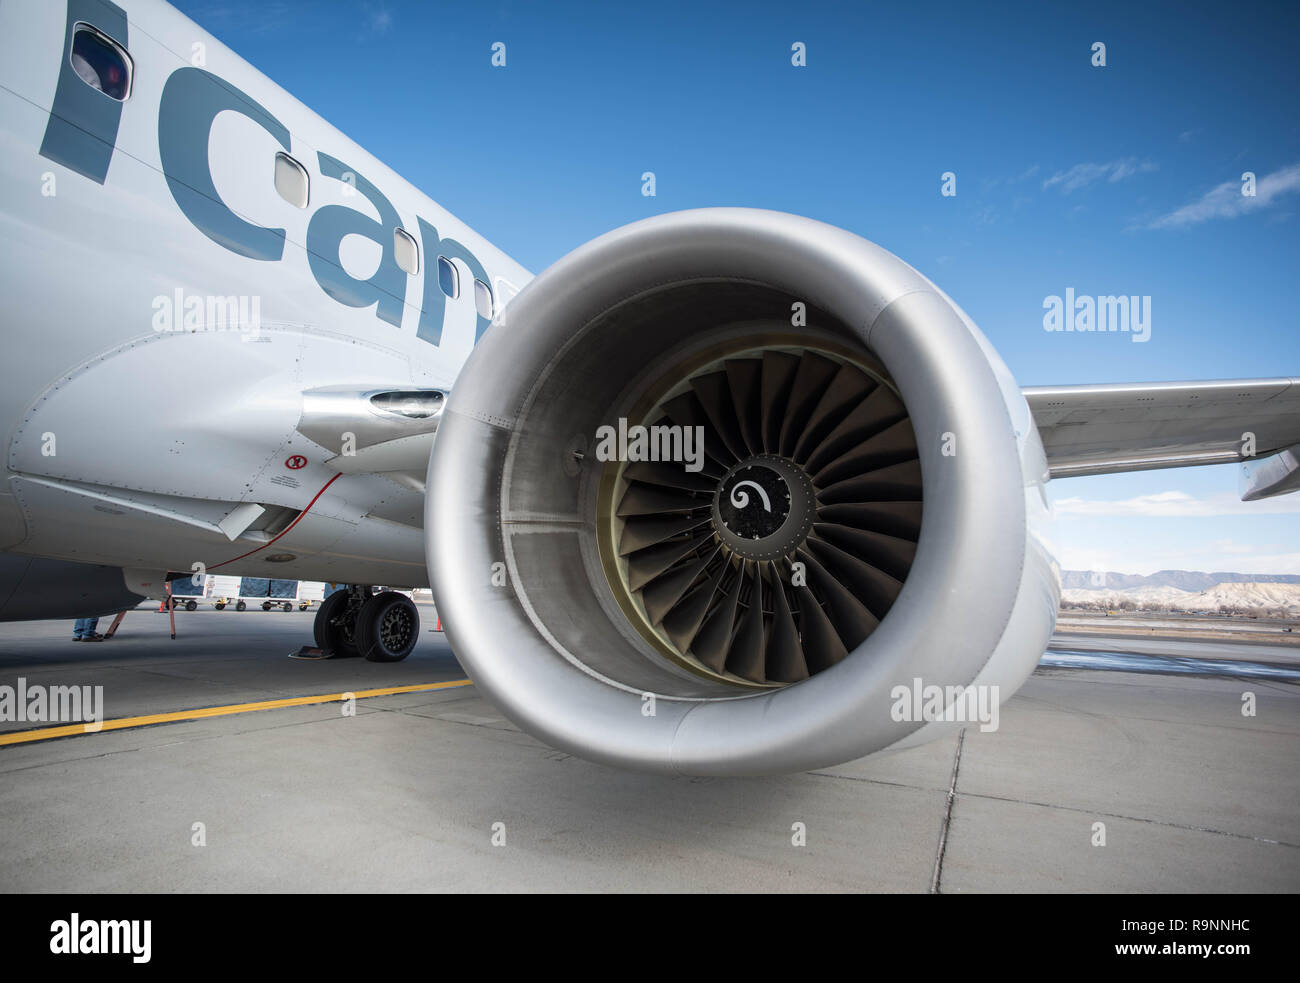 Commercial Passenger Jet Engine on an Aircraft at an Airport Stock Photo